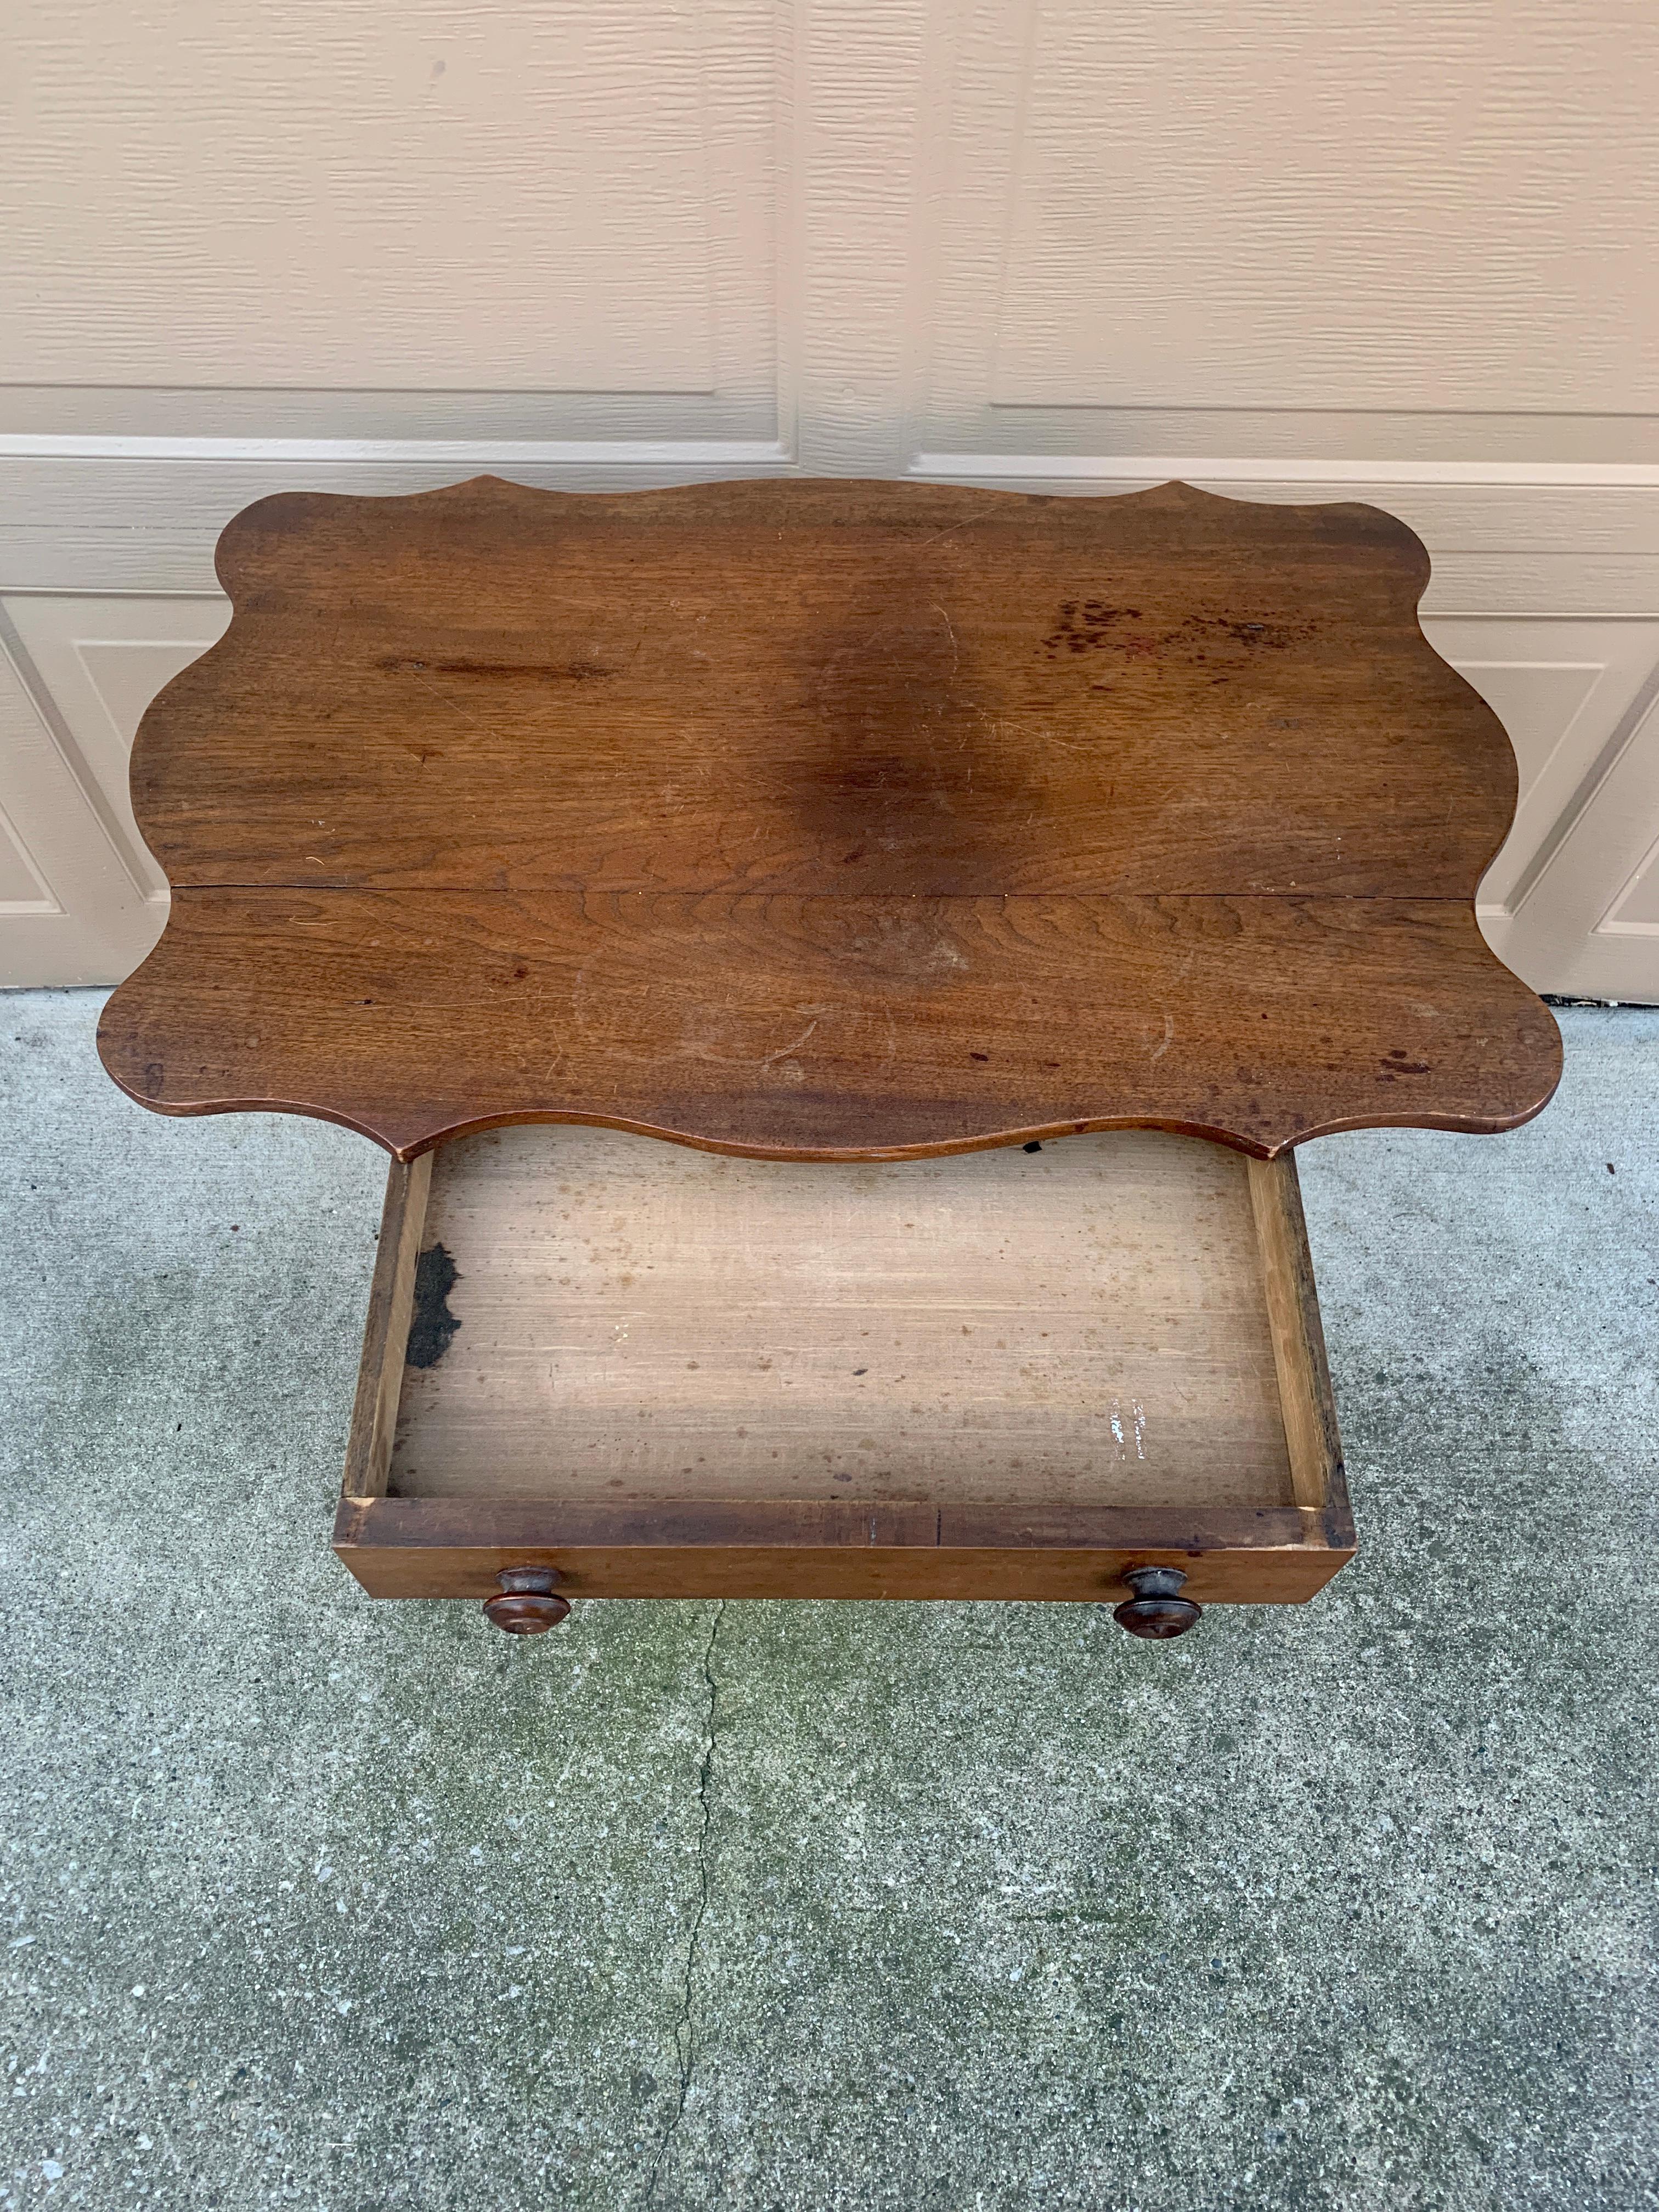 Antique American Oak Side Table With Bobbin Turned Legs, Late 19th Century For Sale 1